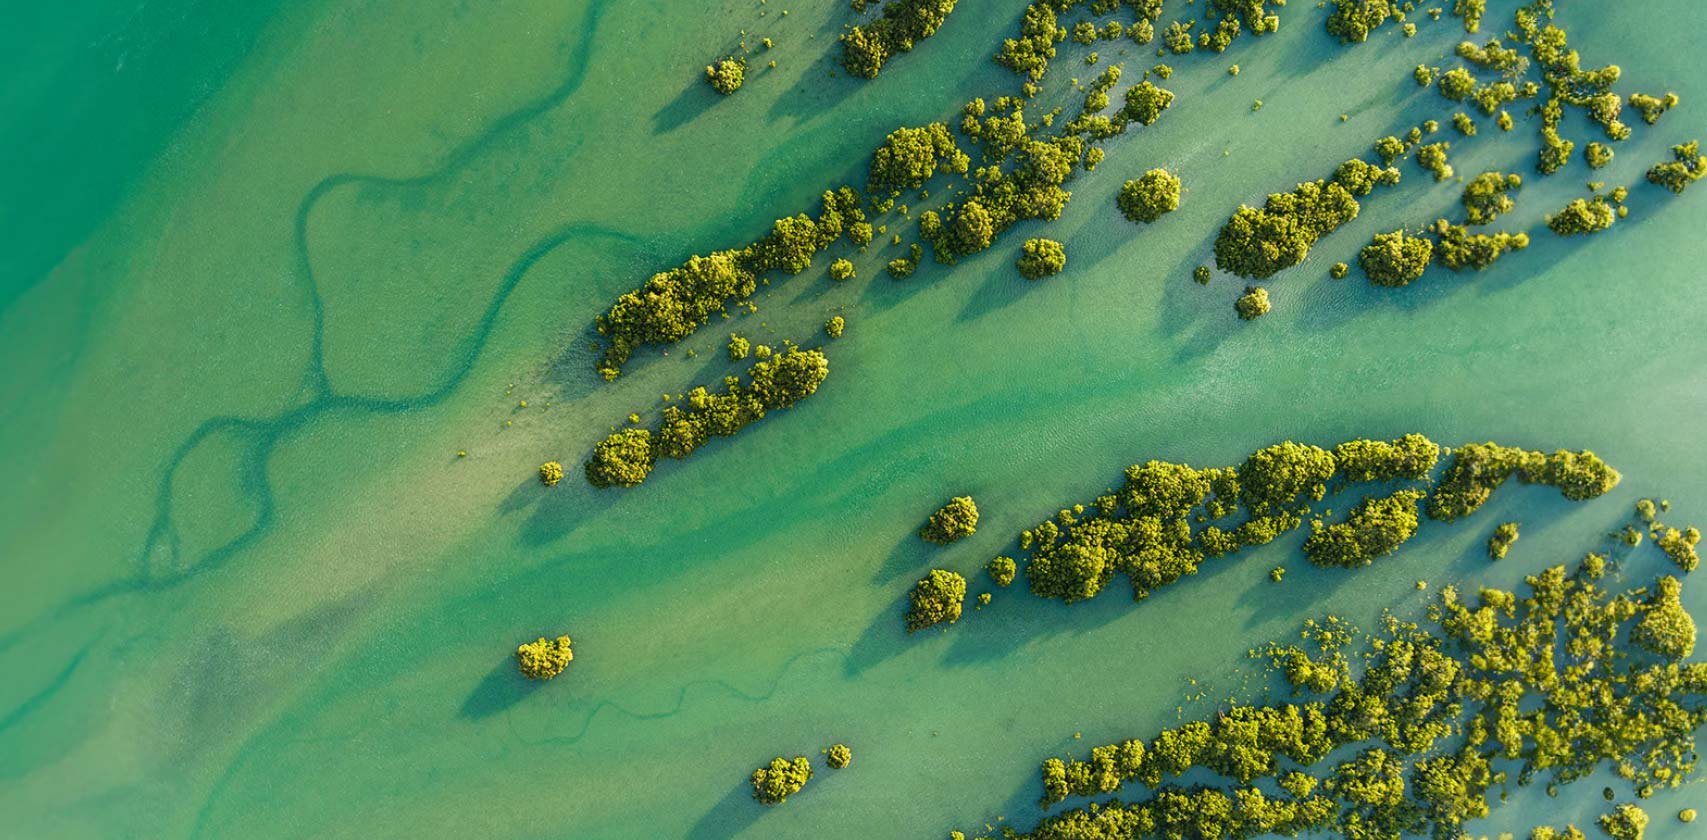 Earth from above: eutrophic green sea, with islands in between